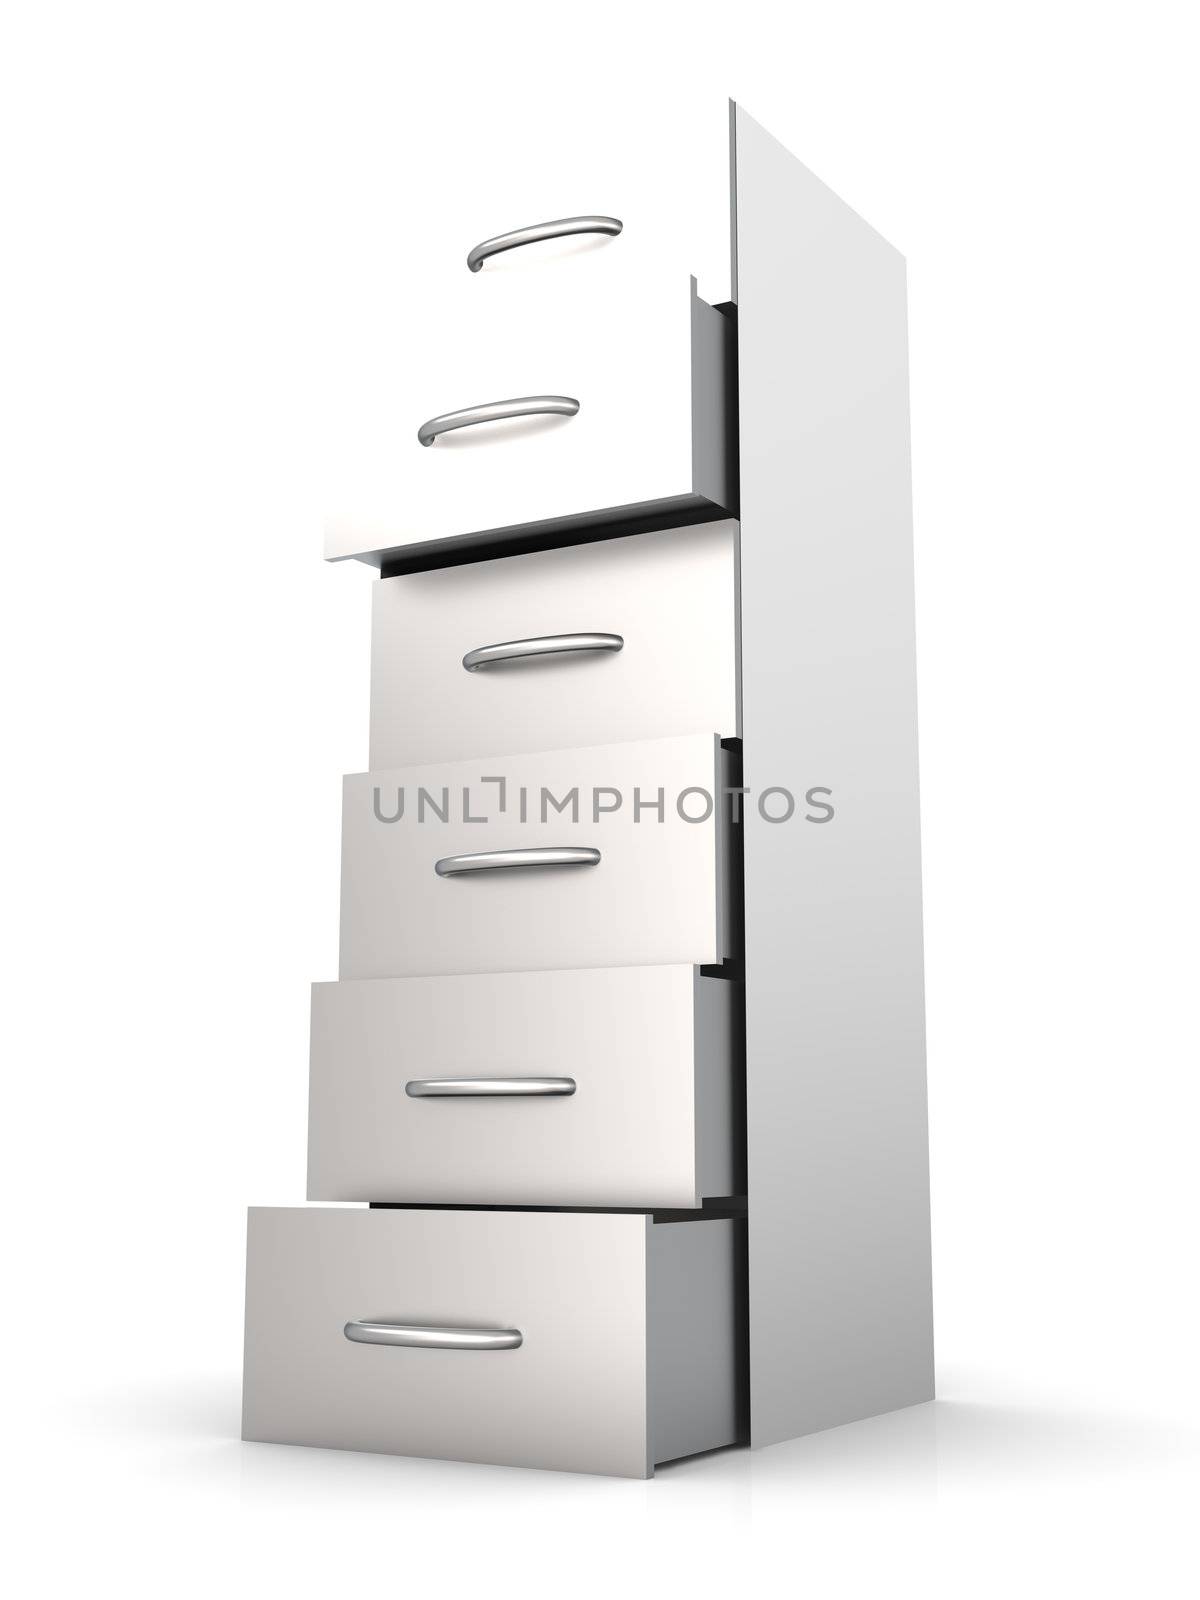 3D rendered Illustration. A filing cabinet. Isolated on white.